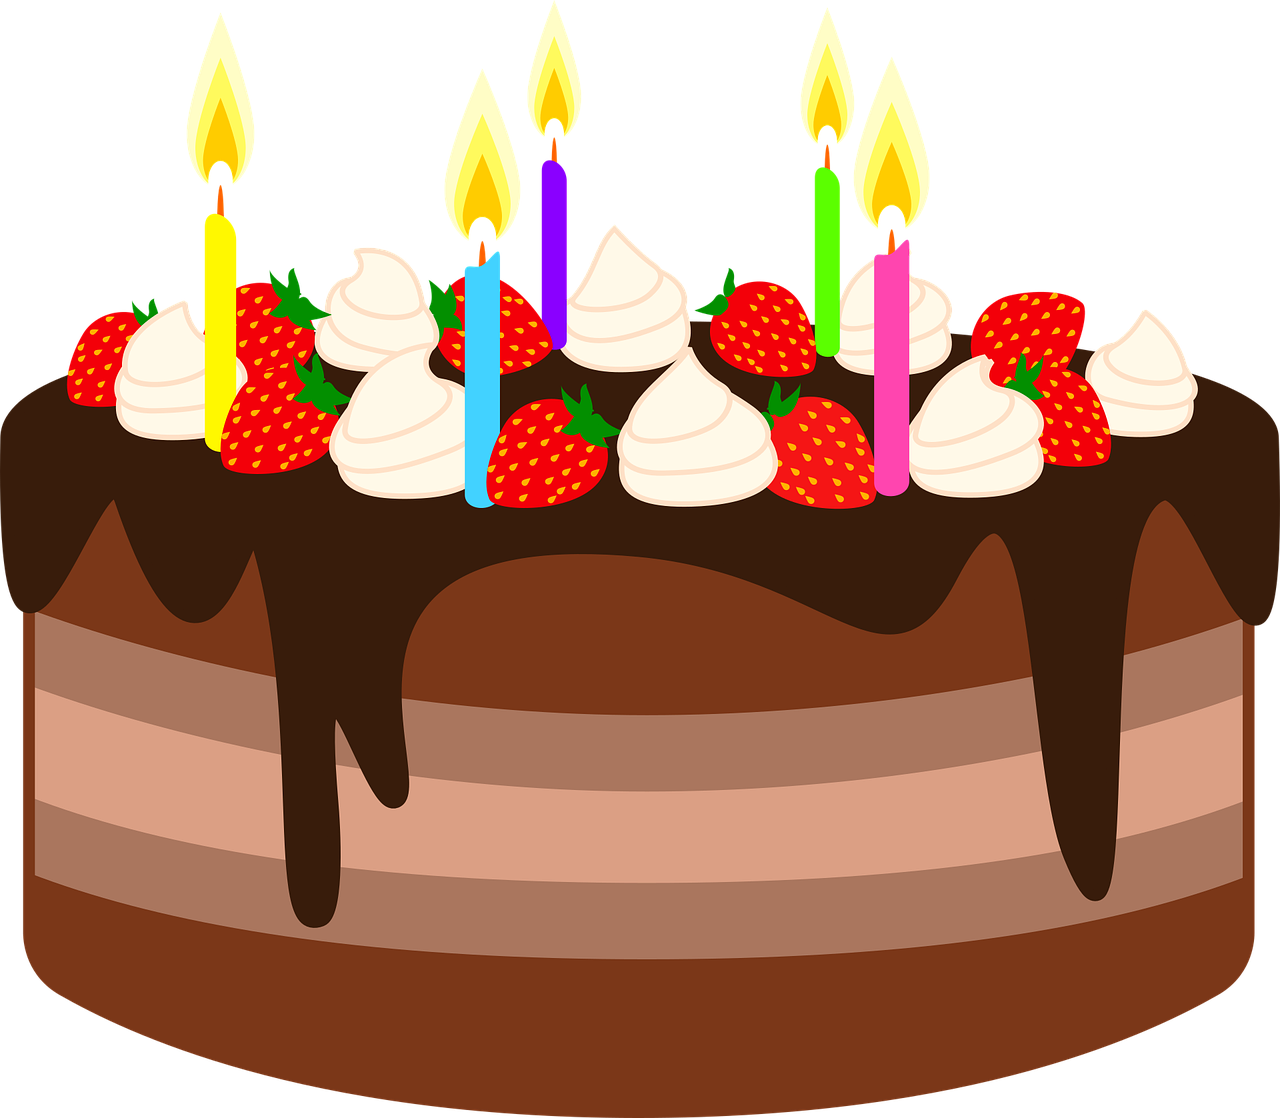 a chocolate cake with strawberries and candles, by Nishida Shun'ei, pixabay, figuration libre, no gradients, at a birthday party, 🐿🍸🍋, ( side ) profile